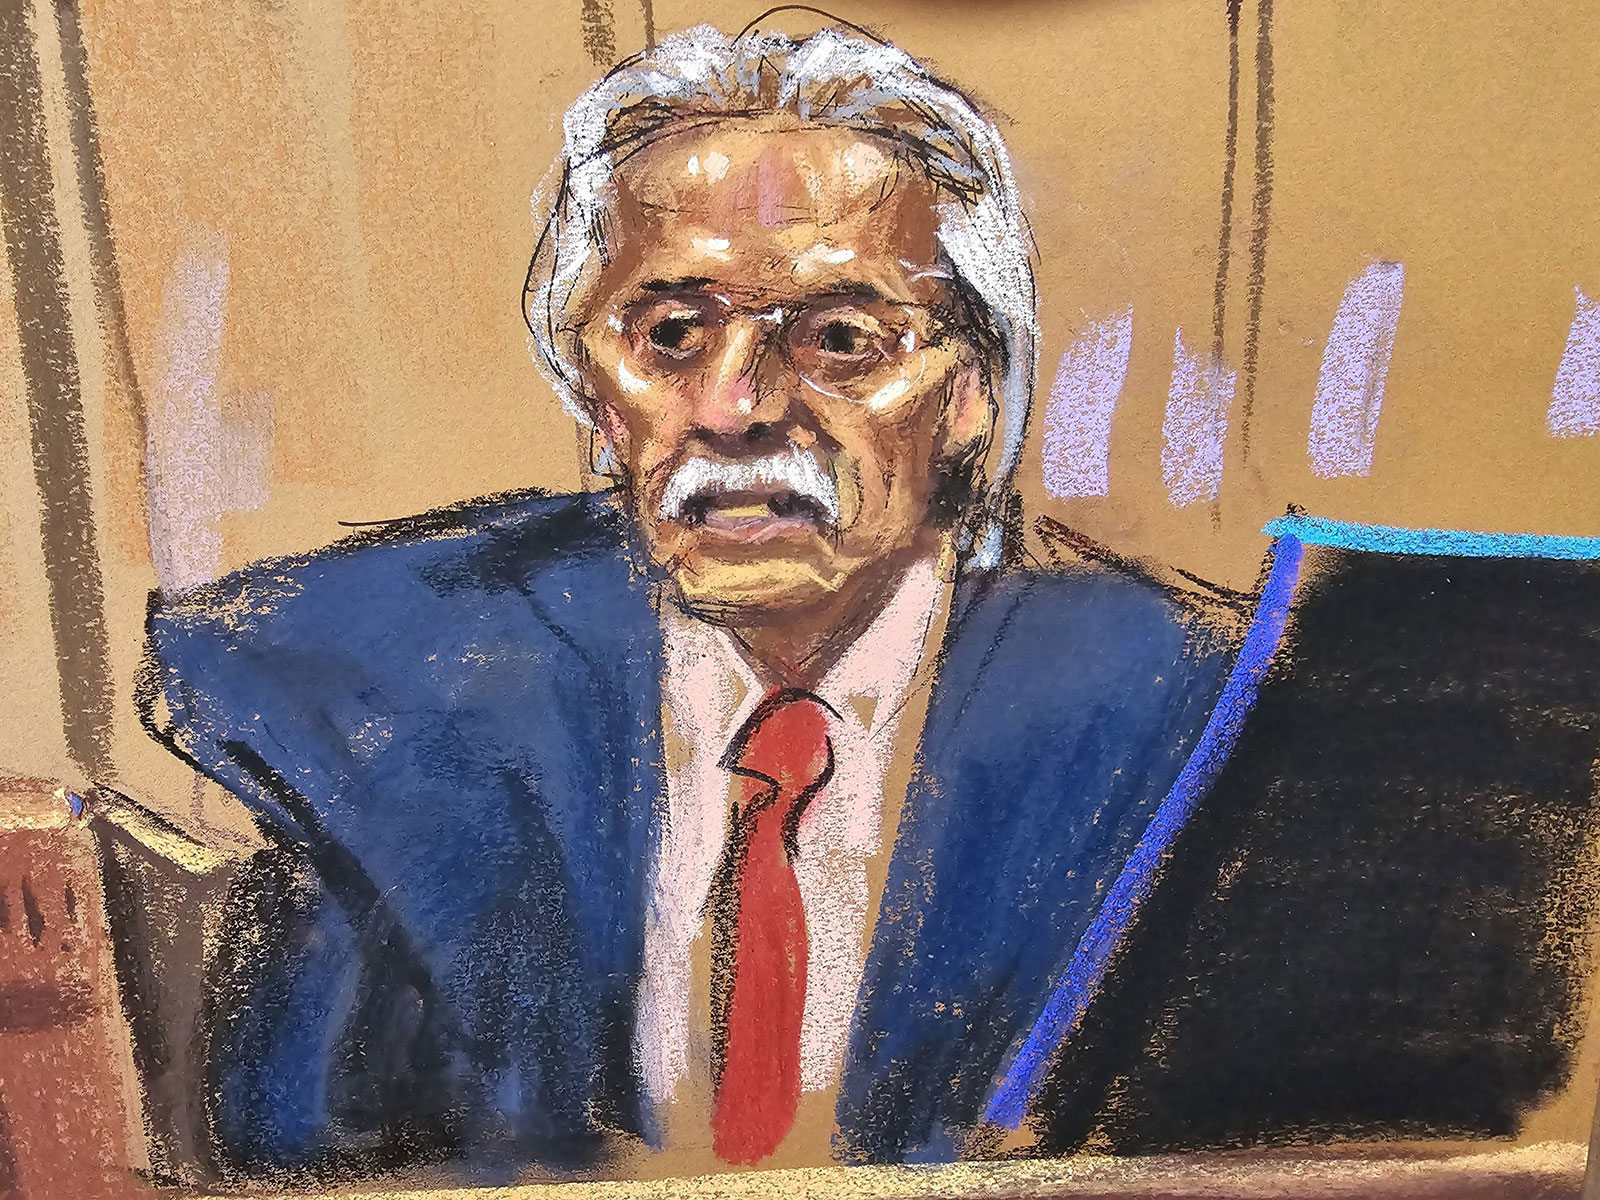 Pecker continues to testify on Thursday.